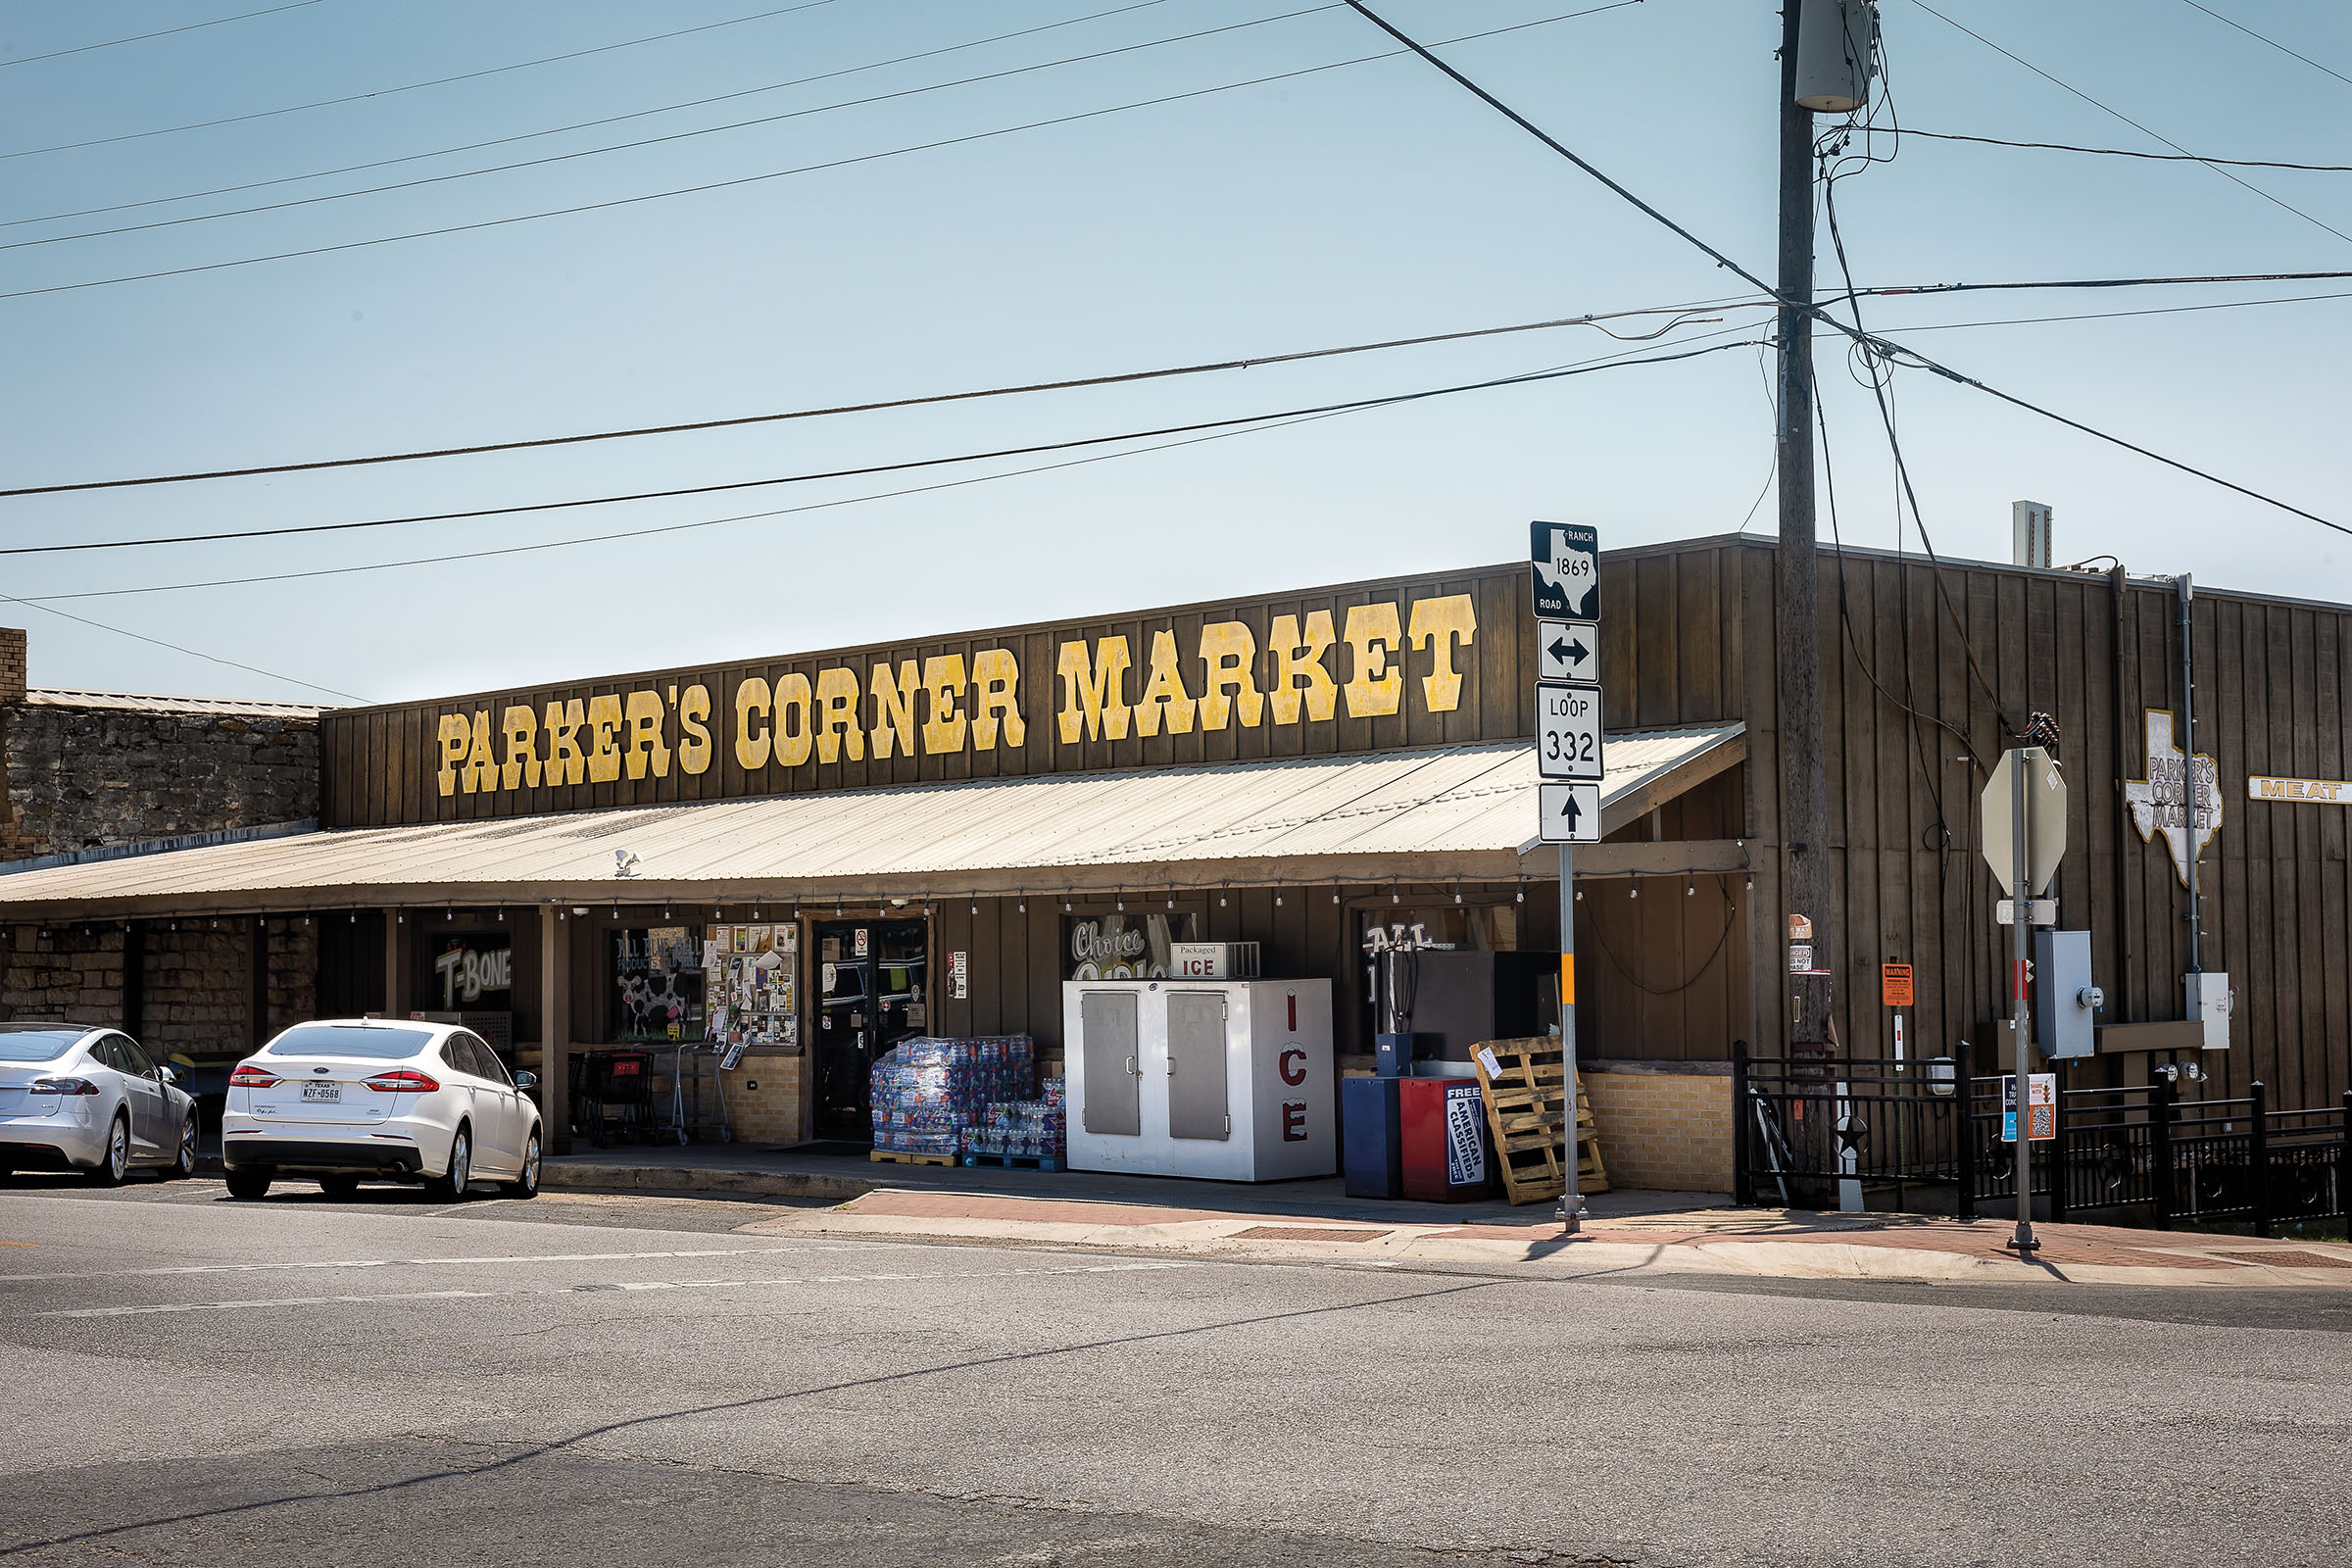 The exterior of a dark wood building reading Parkers Corner Market in yellow lettering